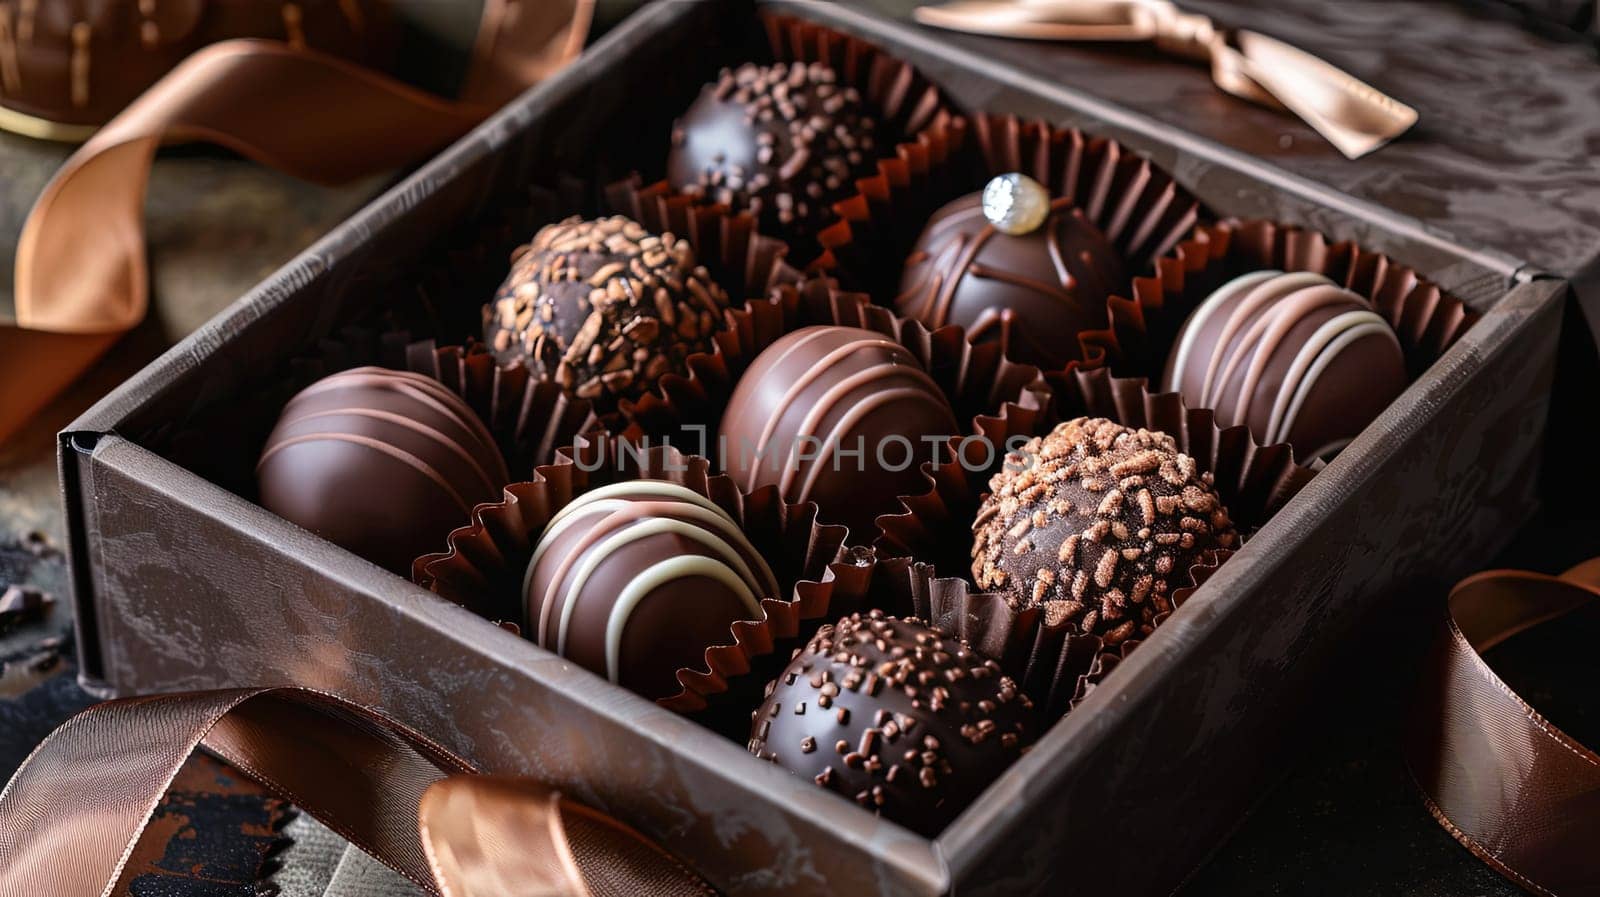 Luxurious box filled with rich dark chocolates, adorned with ribbons, placed on top of a table.